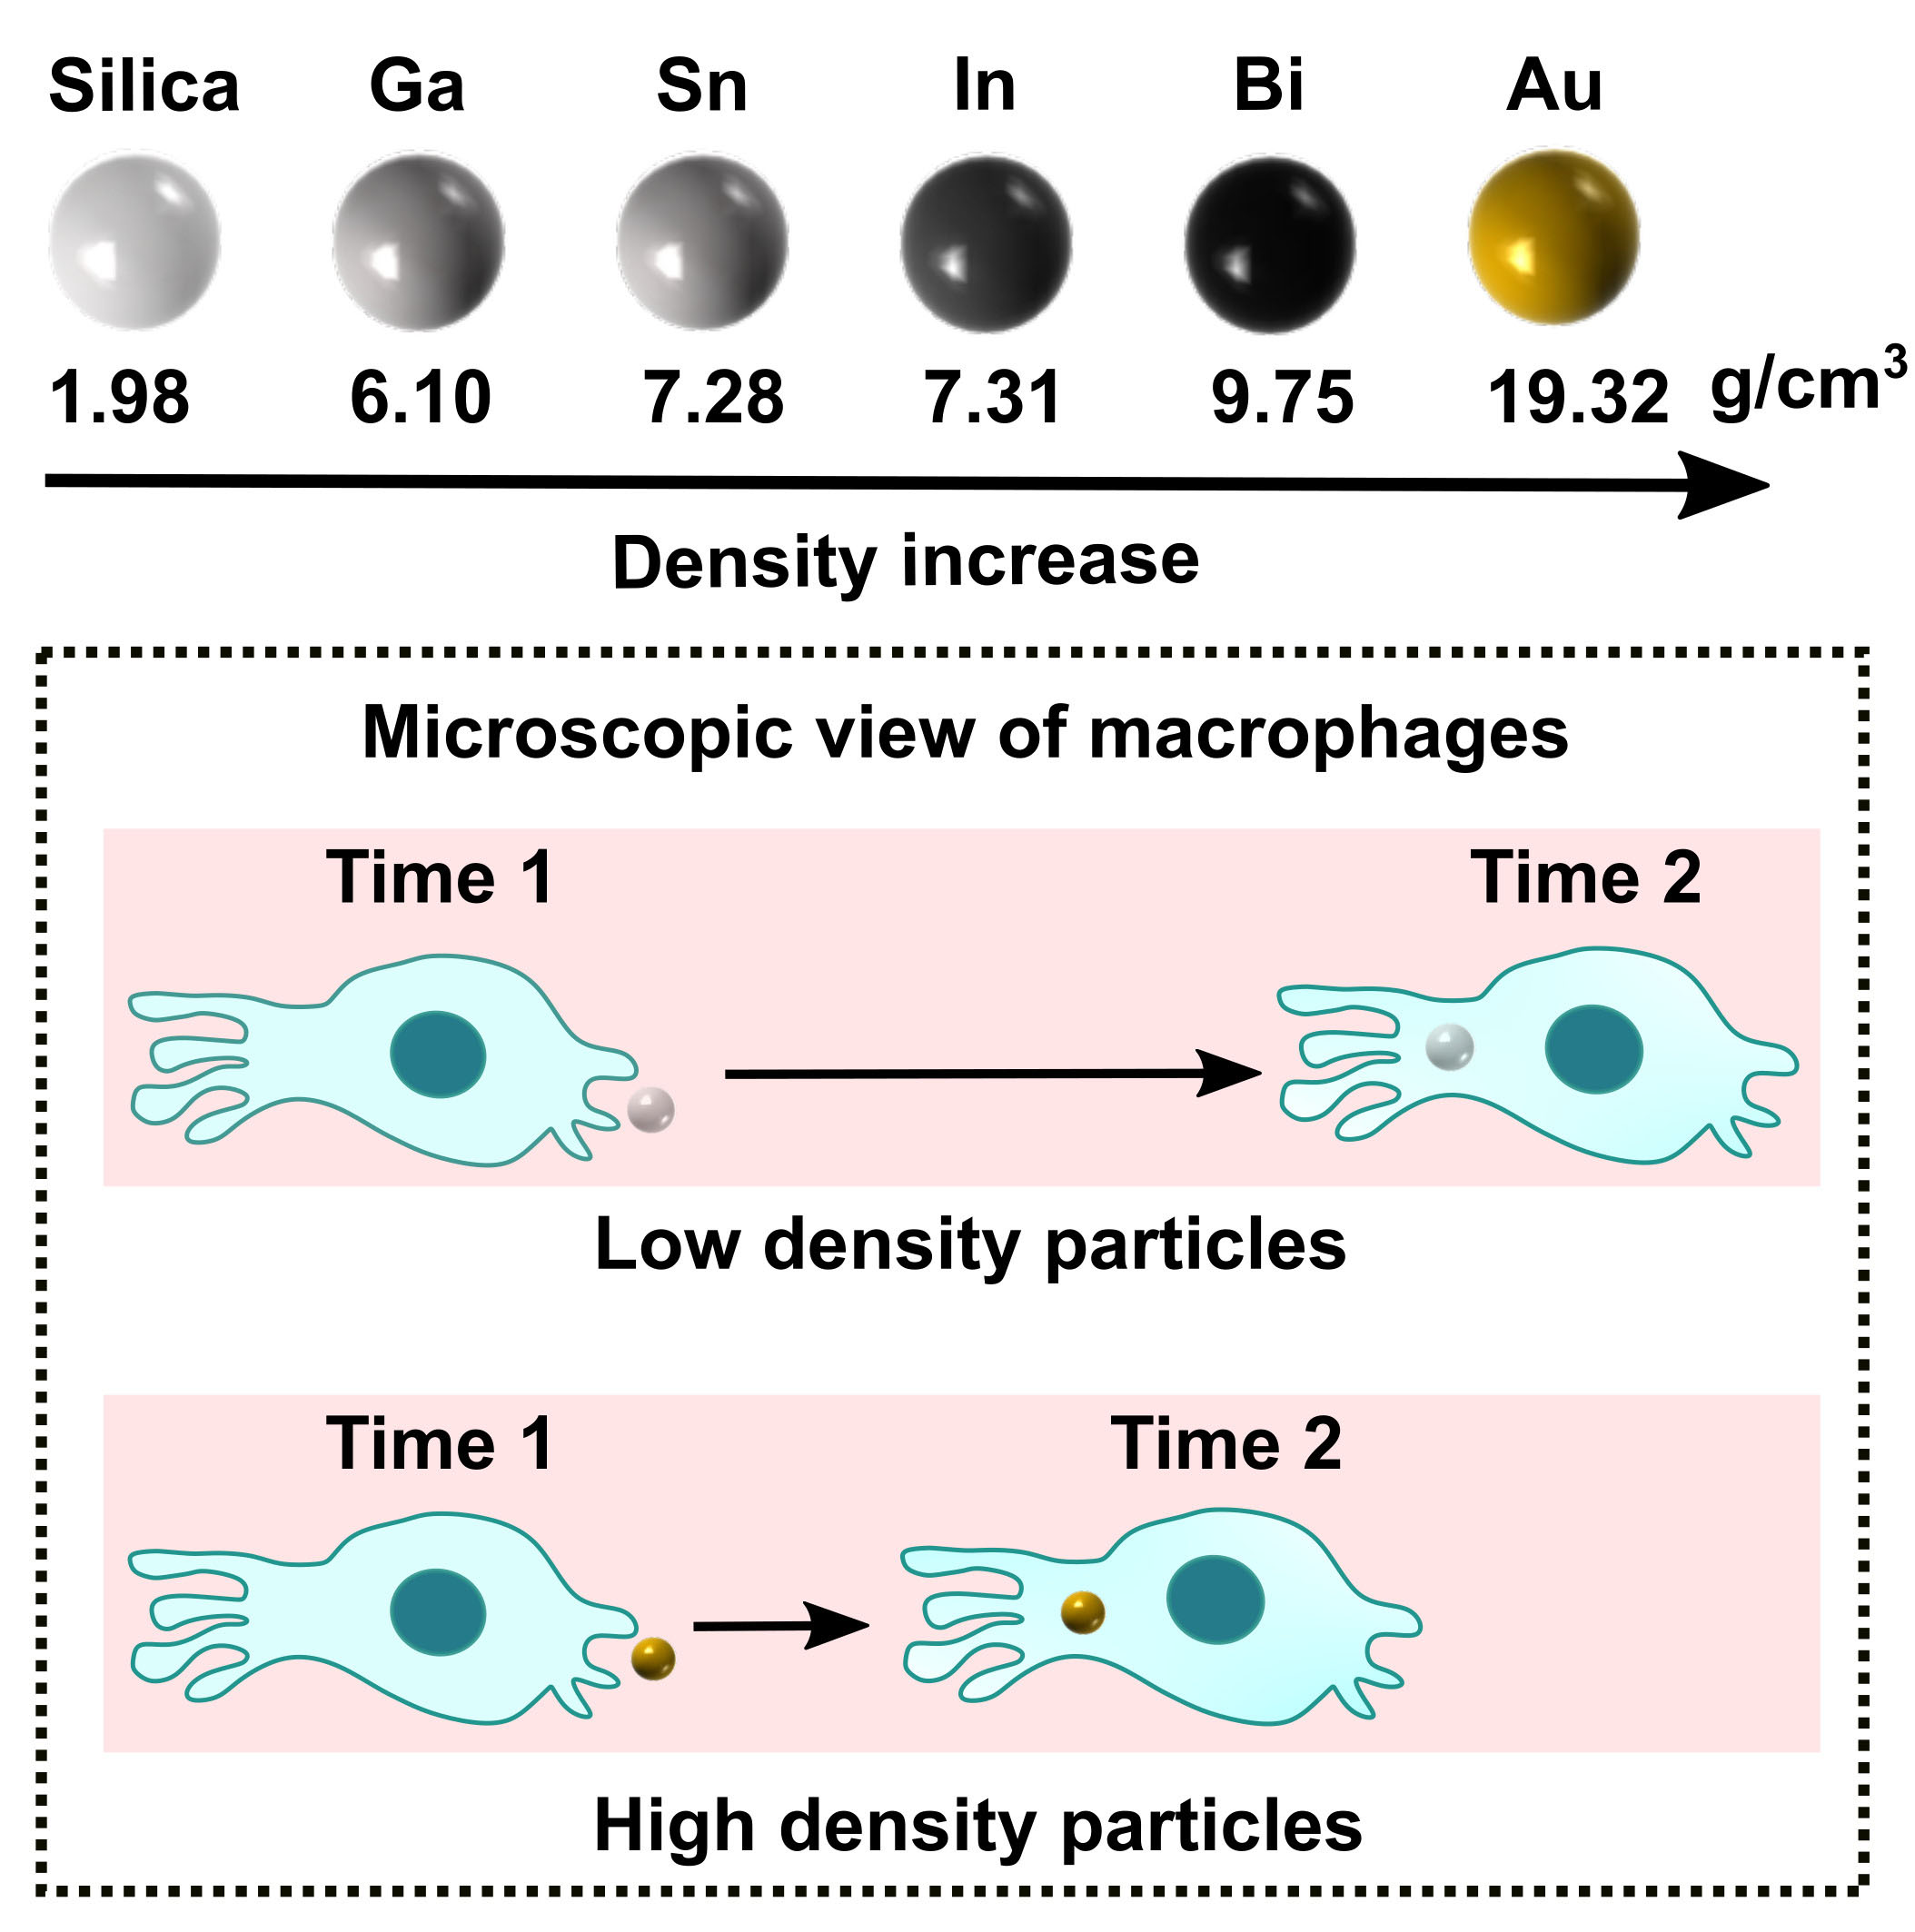 Mechanistic observation of interactions between macrophages and inorganic particles with different densities